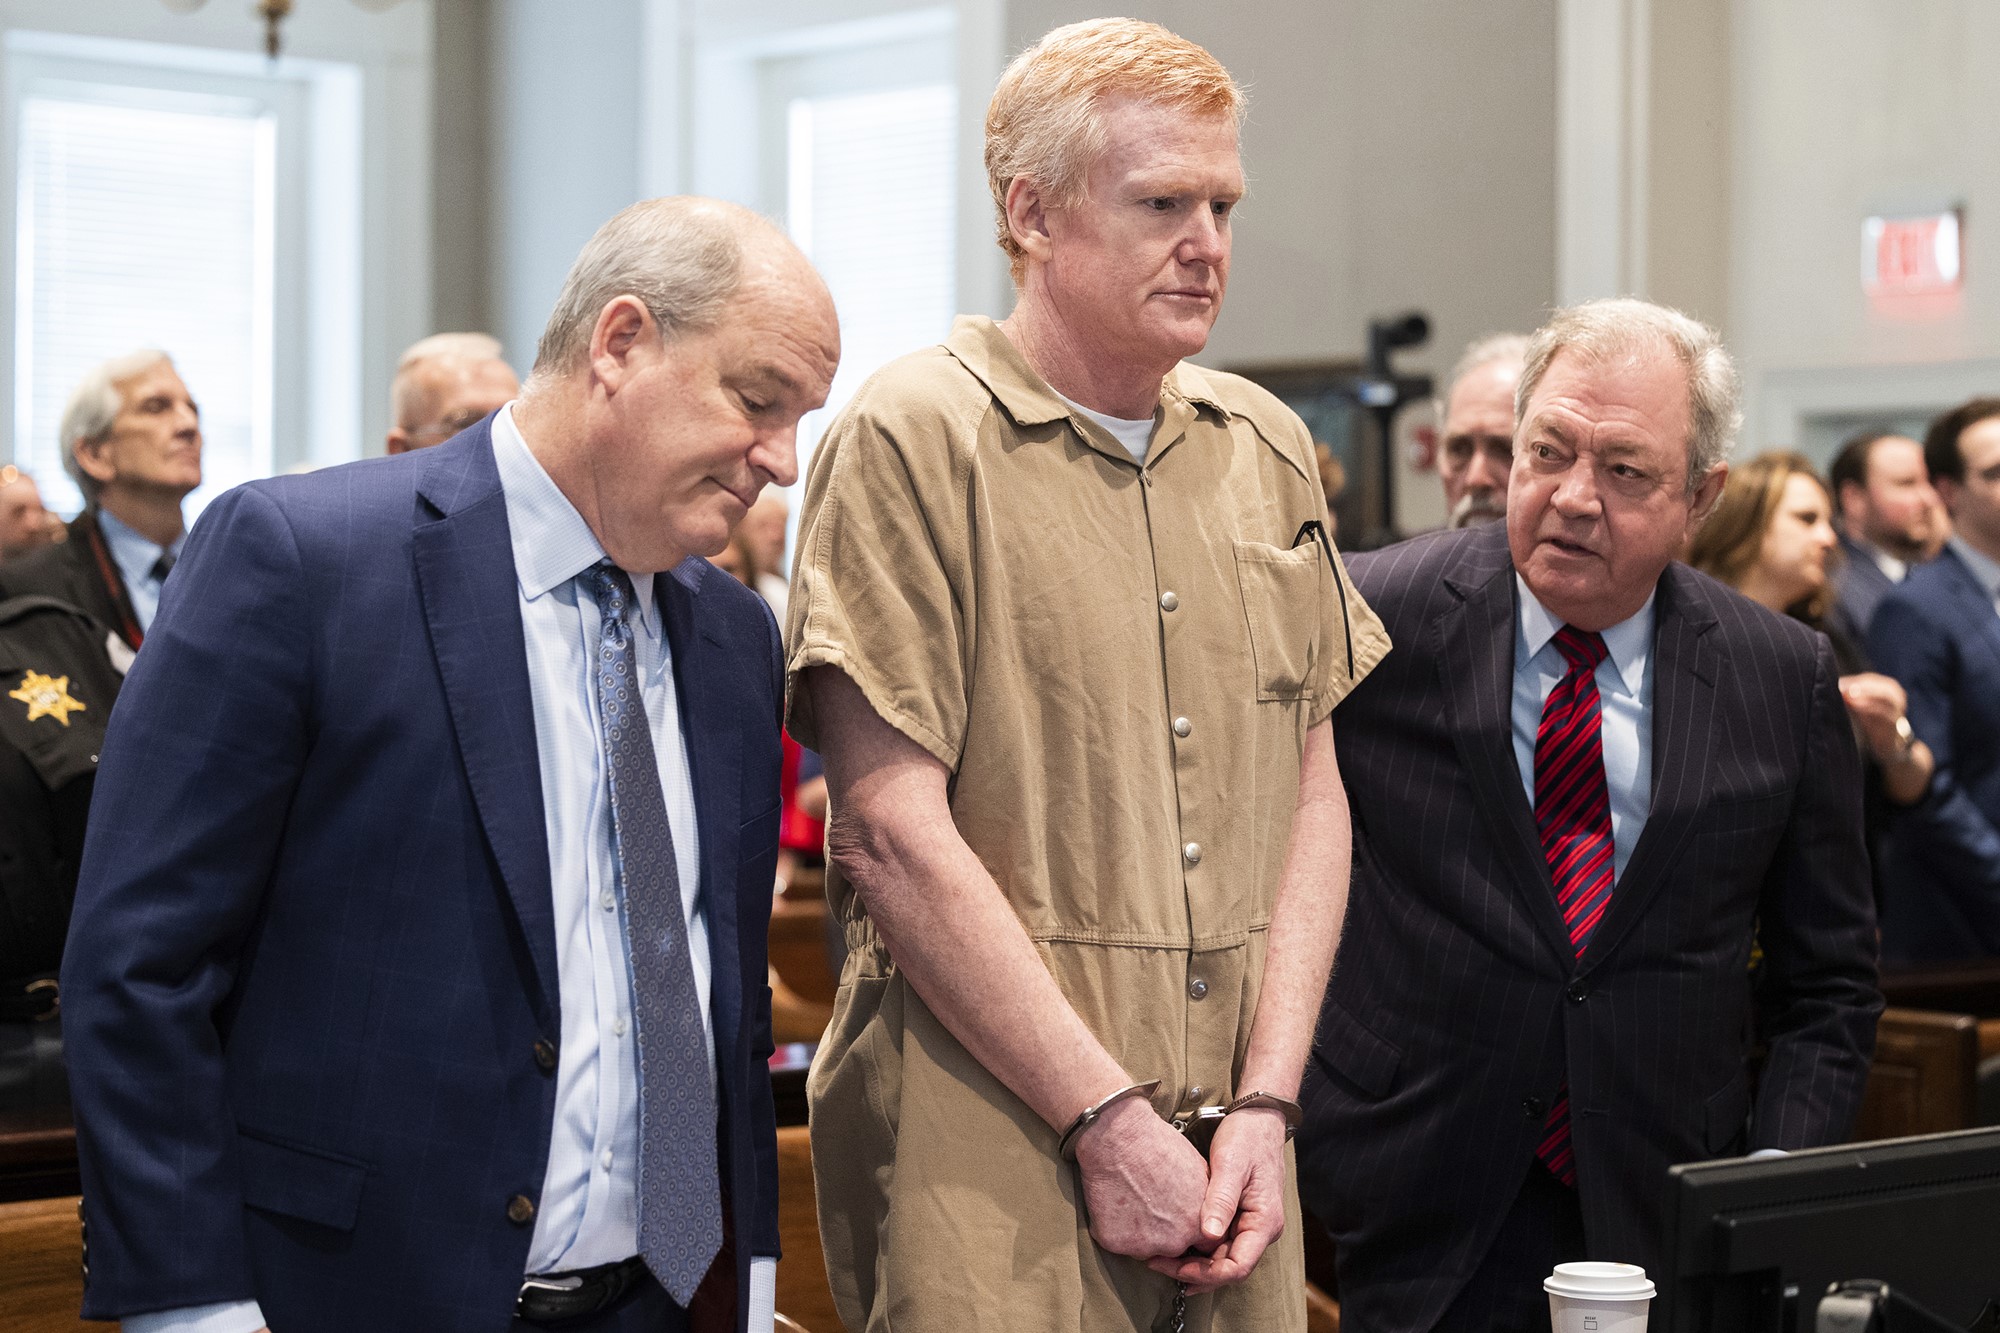 A handcuffed man in a prison jumpsuit is flanked by his lawyers